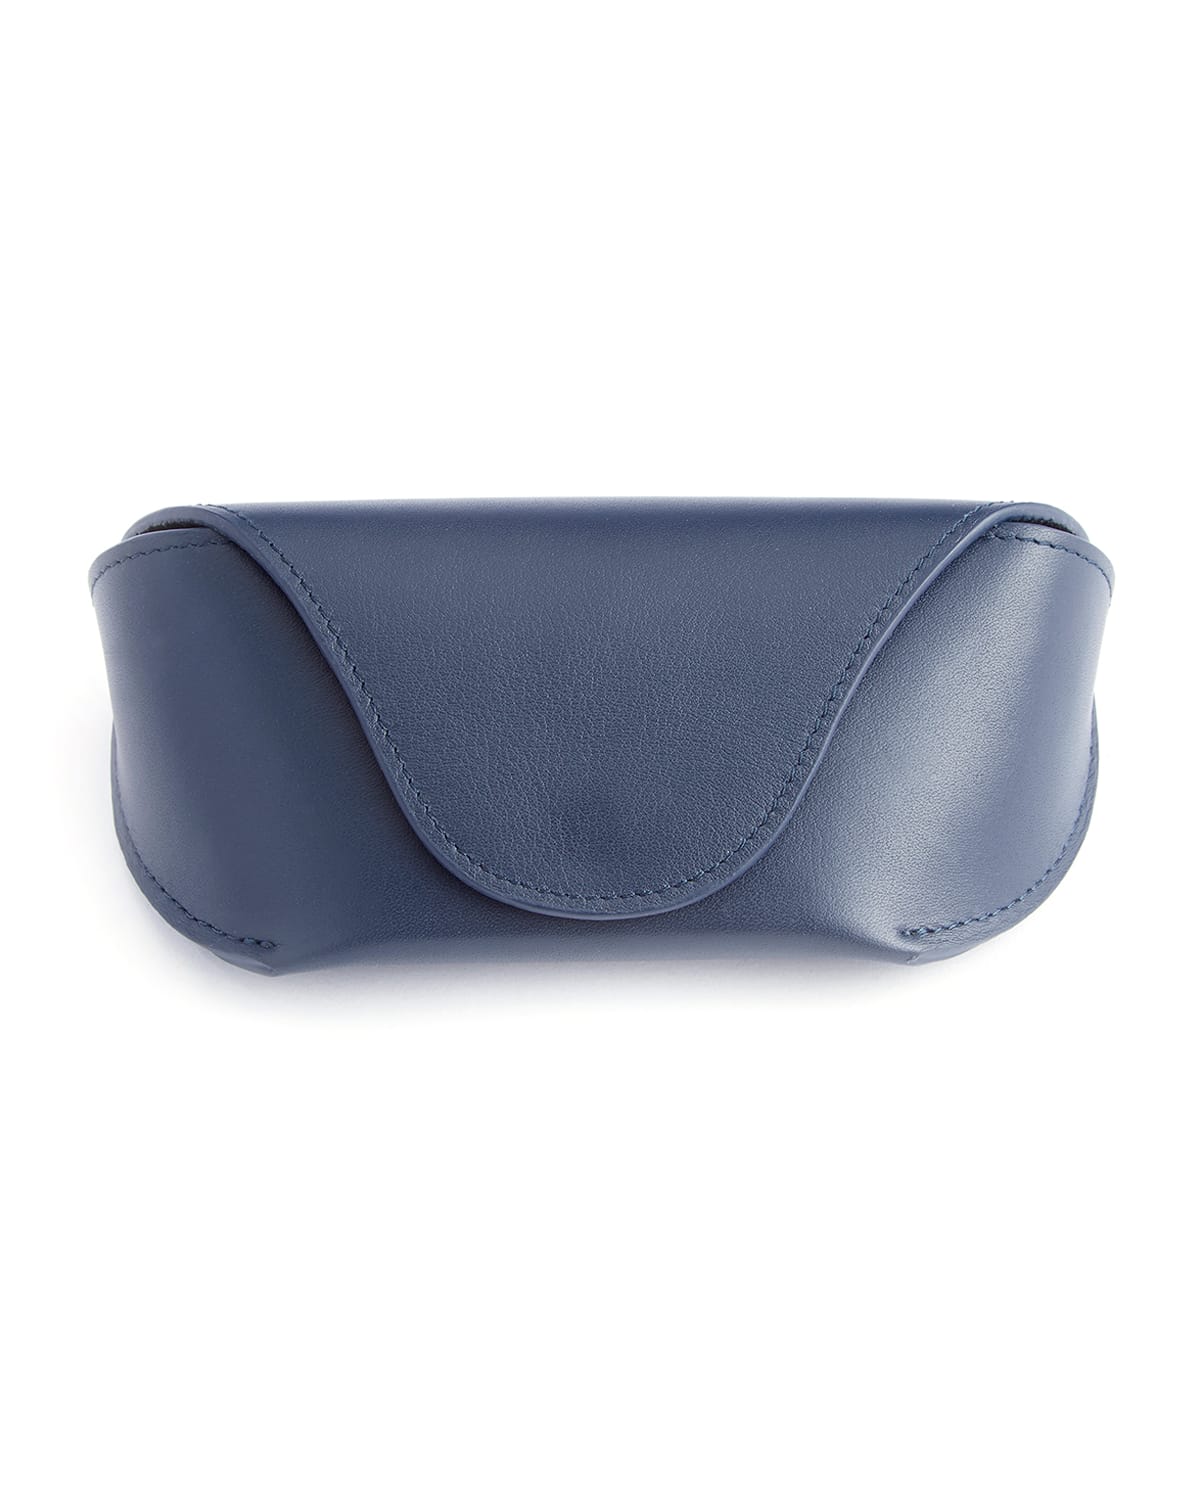 Royce New York Suede Lined Sunglasses Carrying Case In Blue